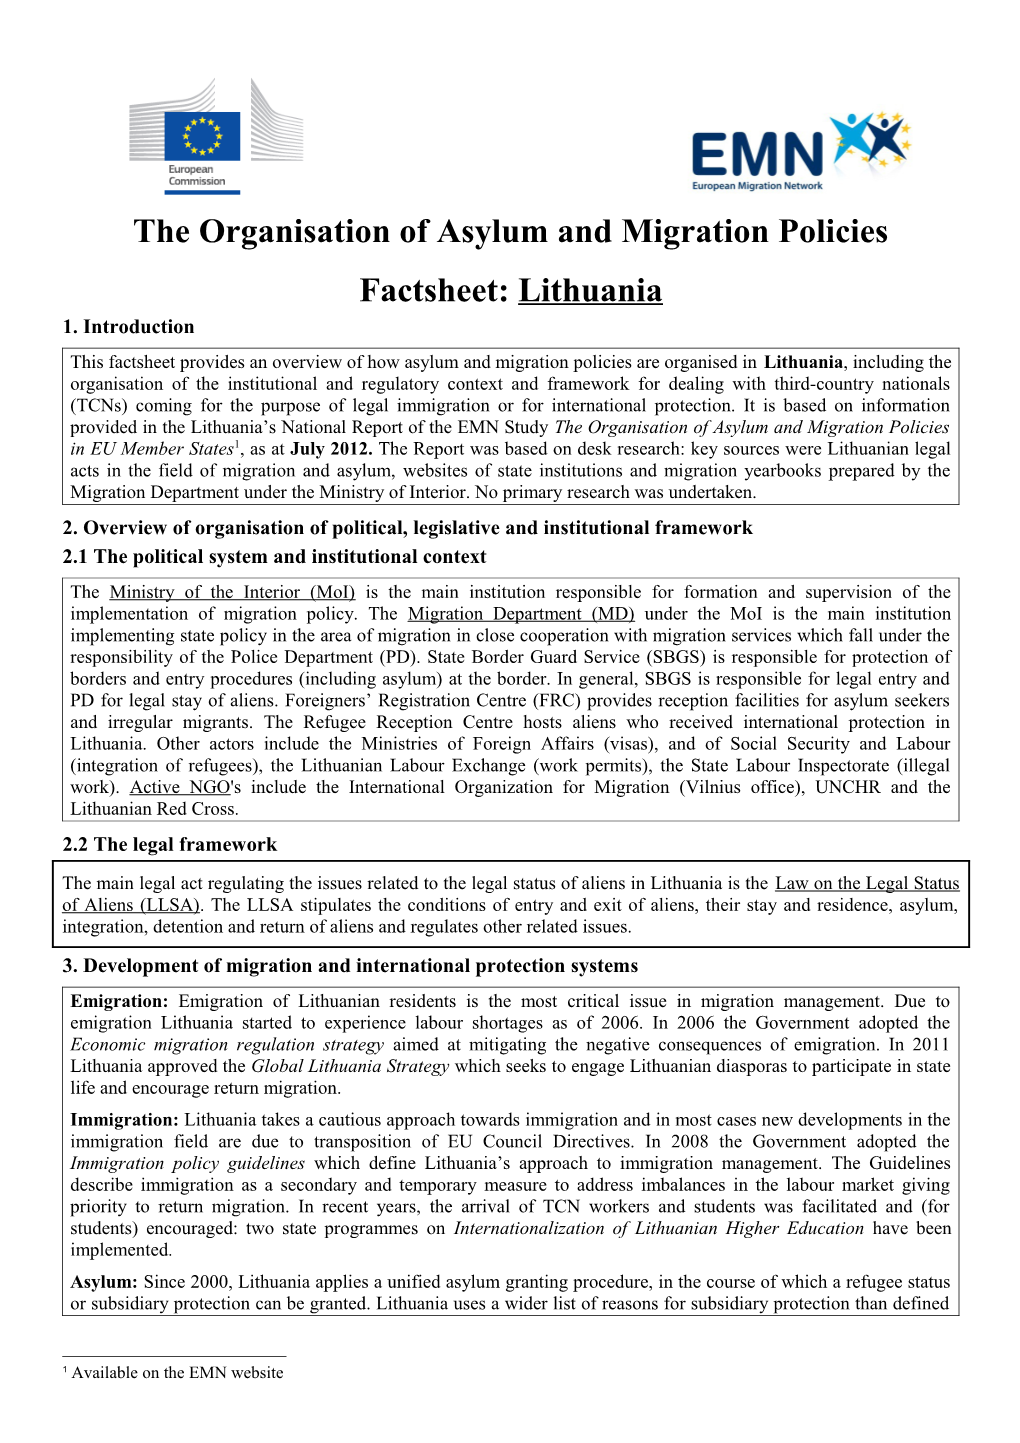 The Organisation of Asylum and Migration Policies